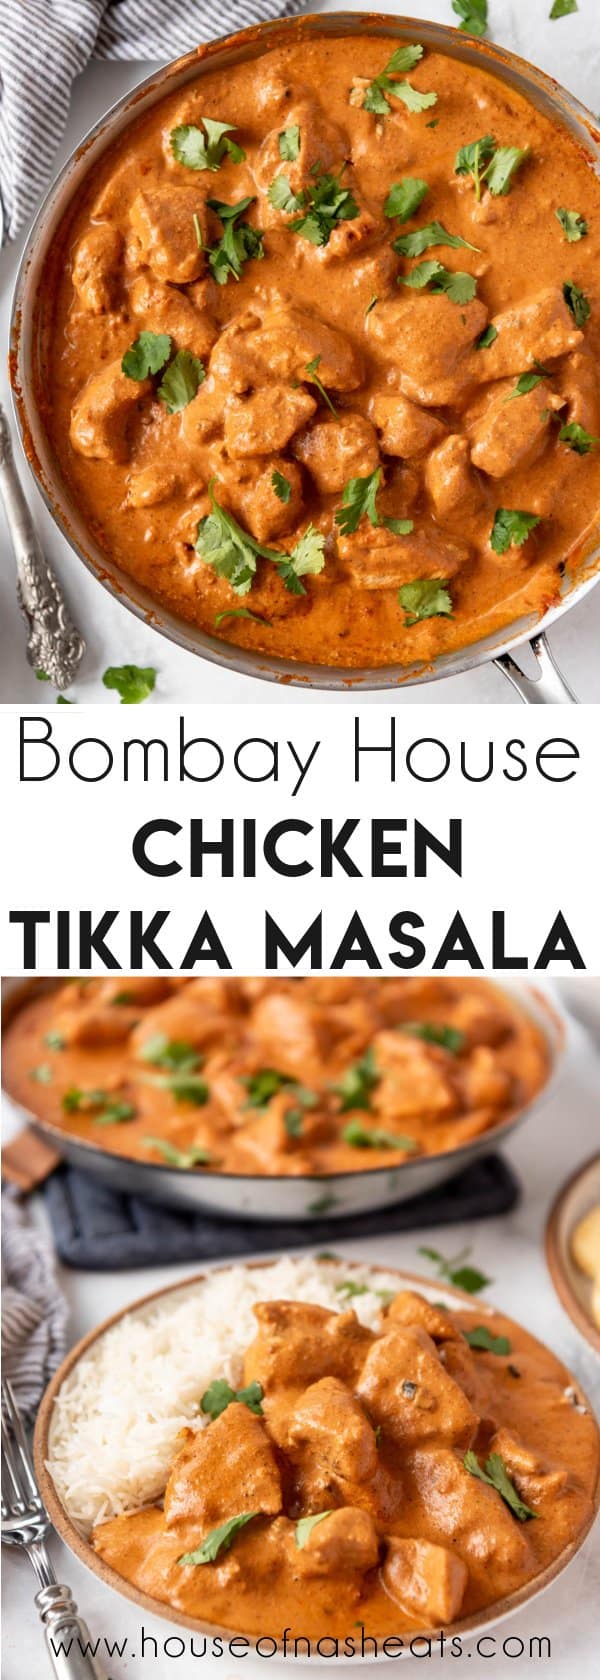 A collage of images of chicken tikka masala with text overlay.